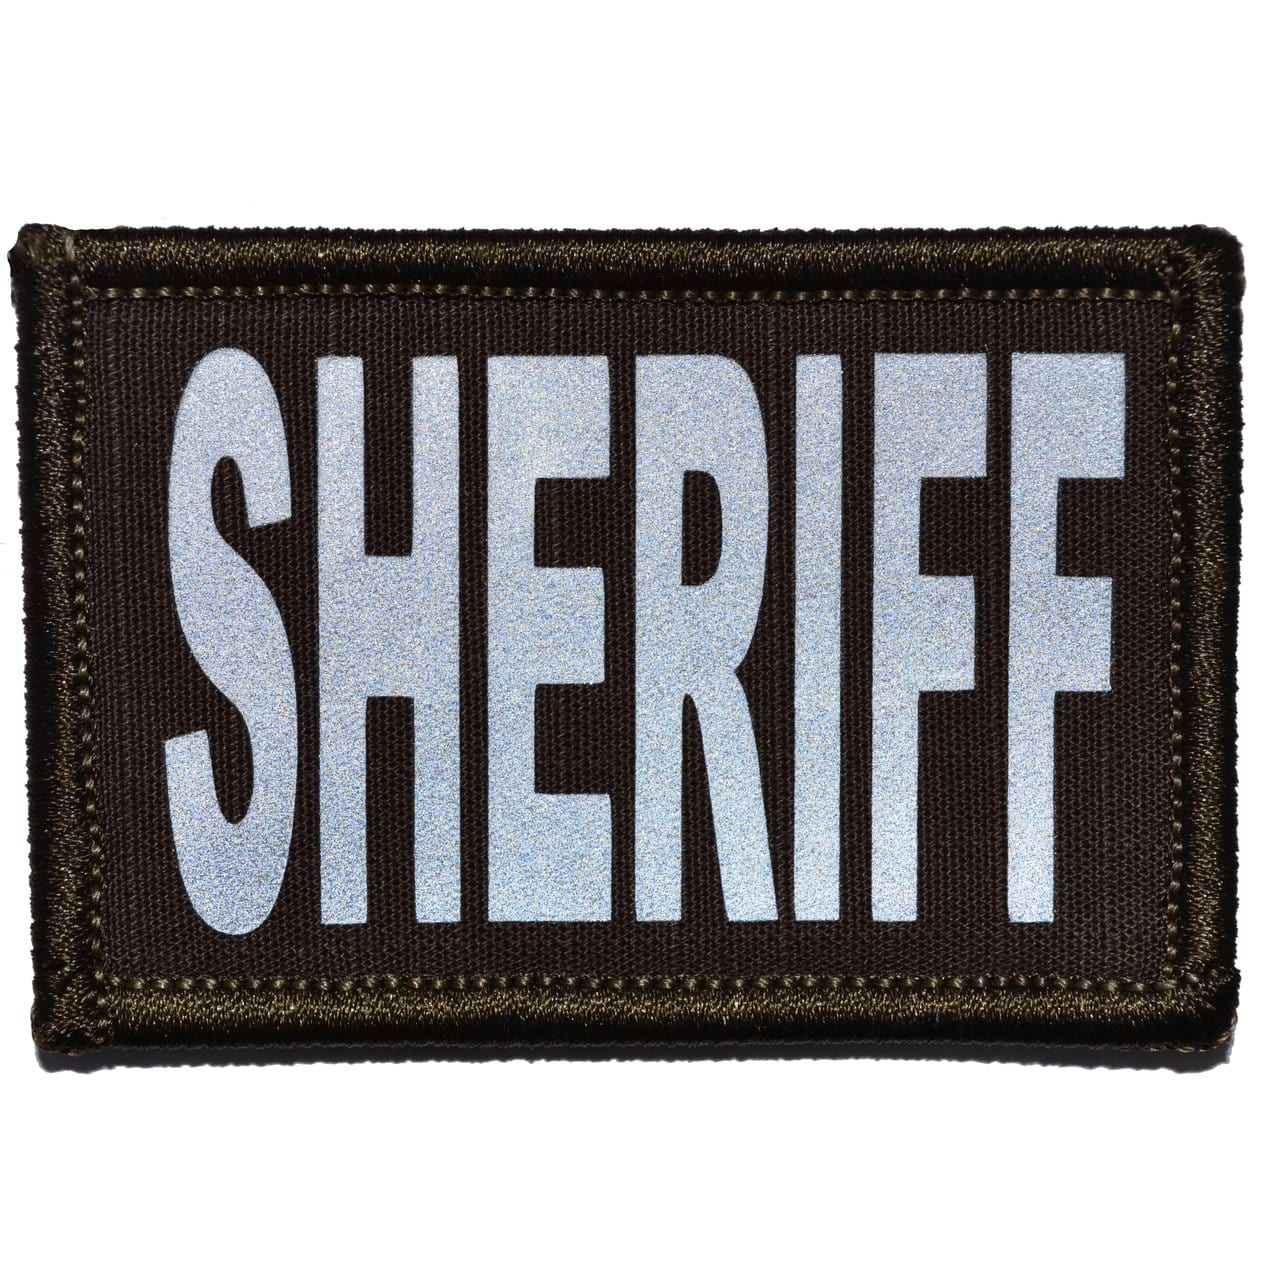 Tactical Gear Junkie Patches Sheriff's Brown Sheriff Reflective - 2x3 Patch